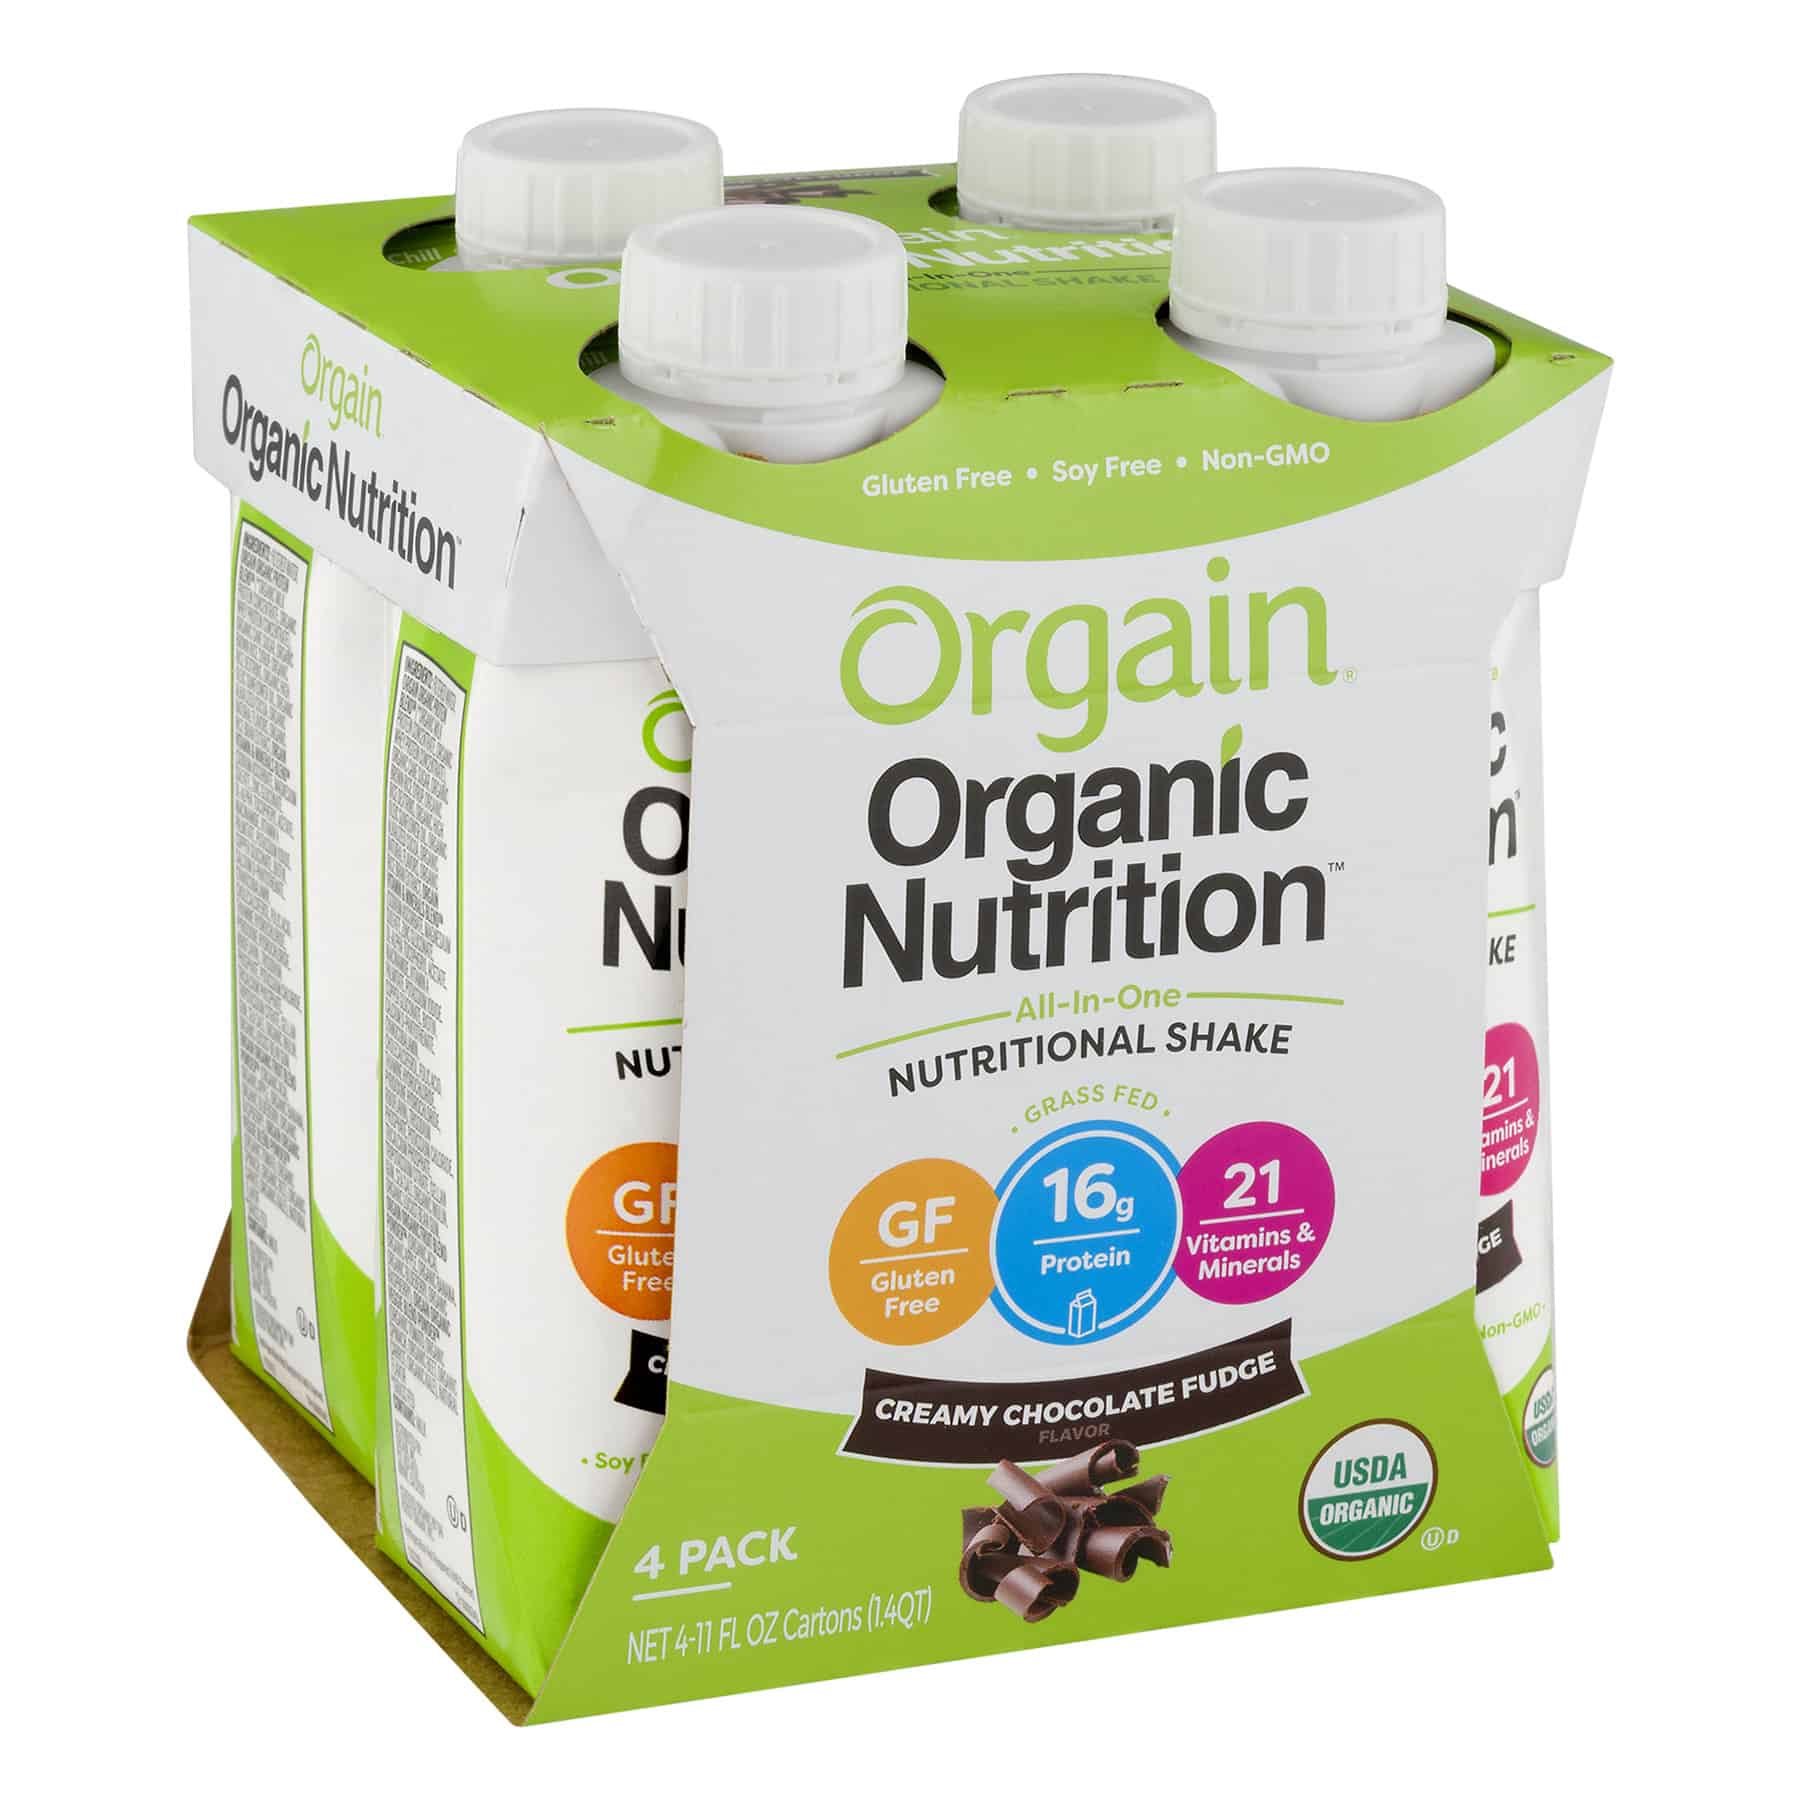 https://www.personallydelivered.com/uploads/products/860547000013-Orgain%20Organic%20Oral%20Supplement%20Nutritional%20Shake.jpeg